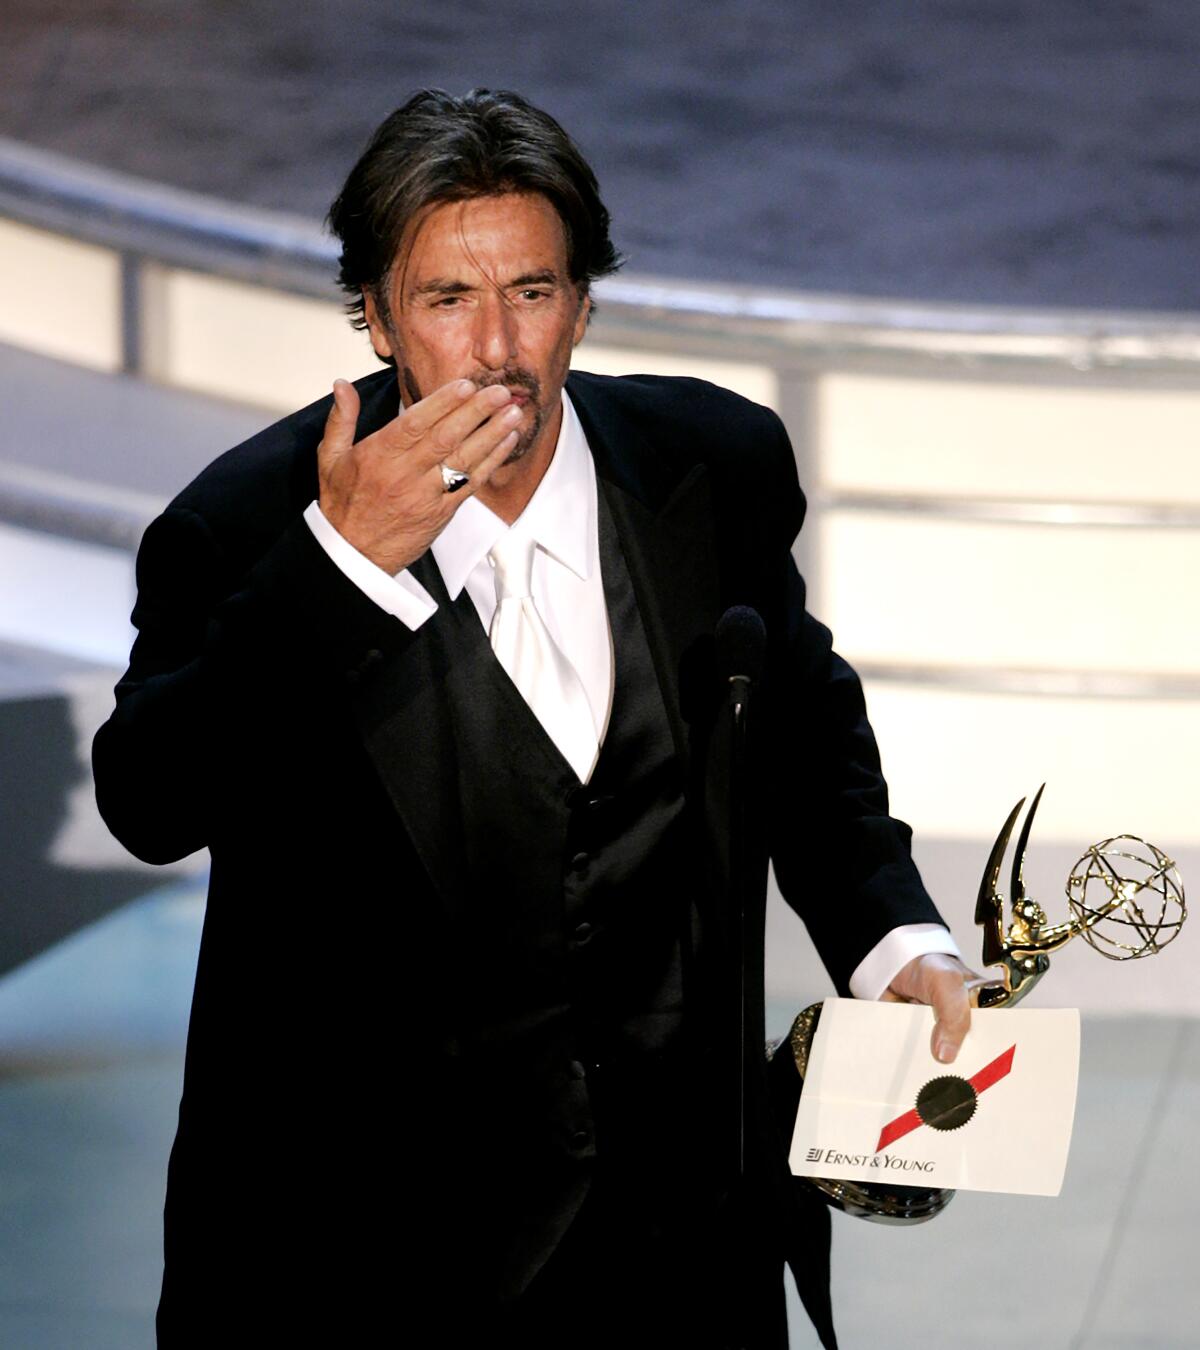 Al Pacino holds his Emmy in one hand and blows a kiss to the audience with the other at the 2004 Emmy Awards.